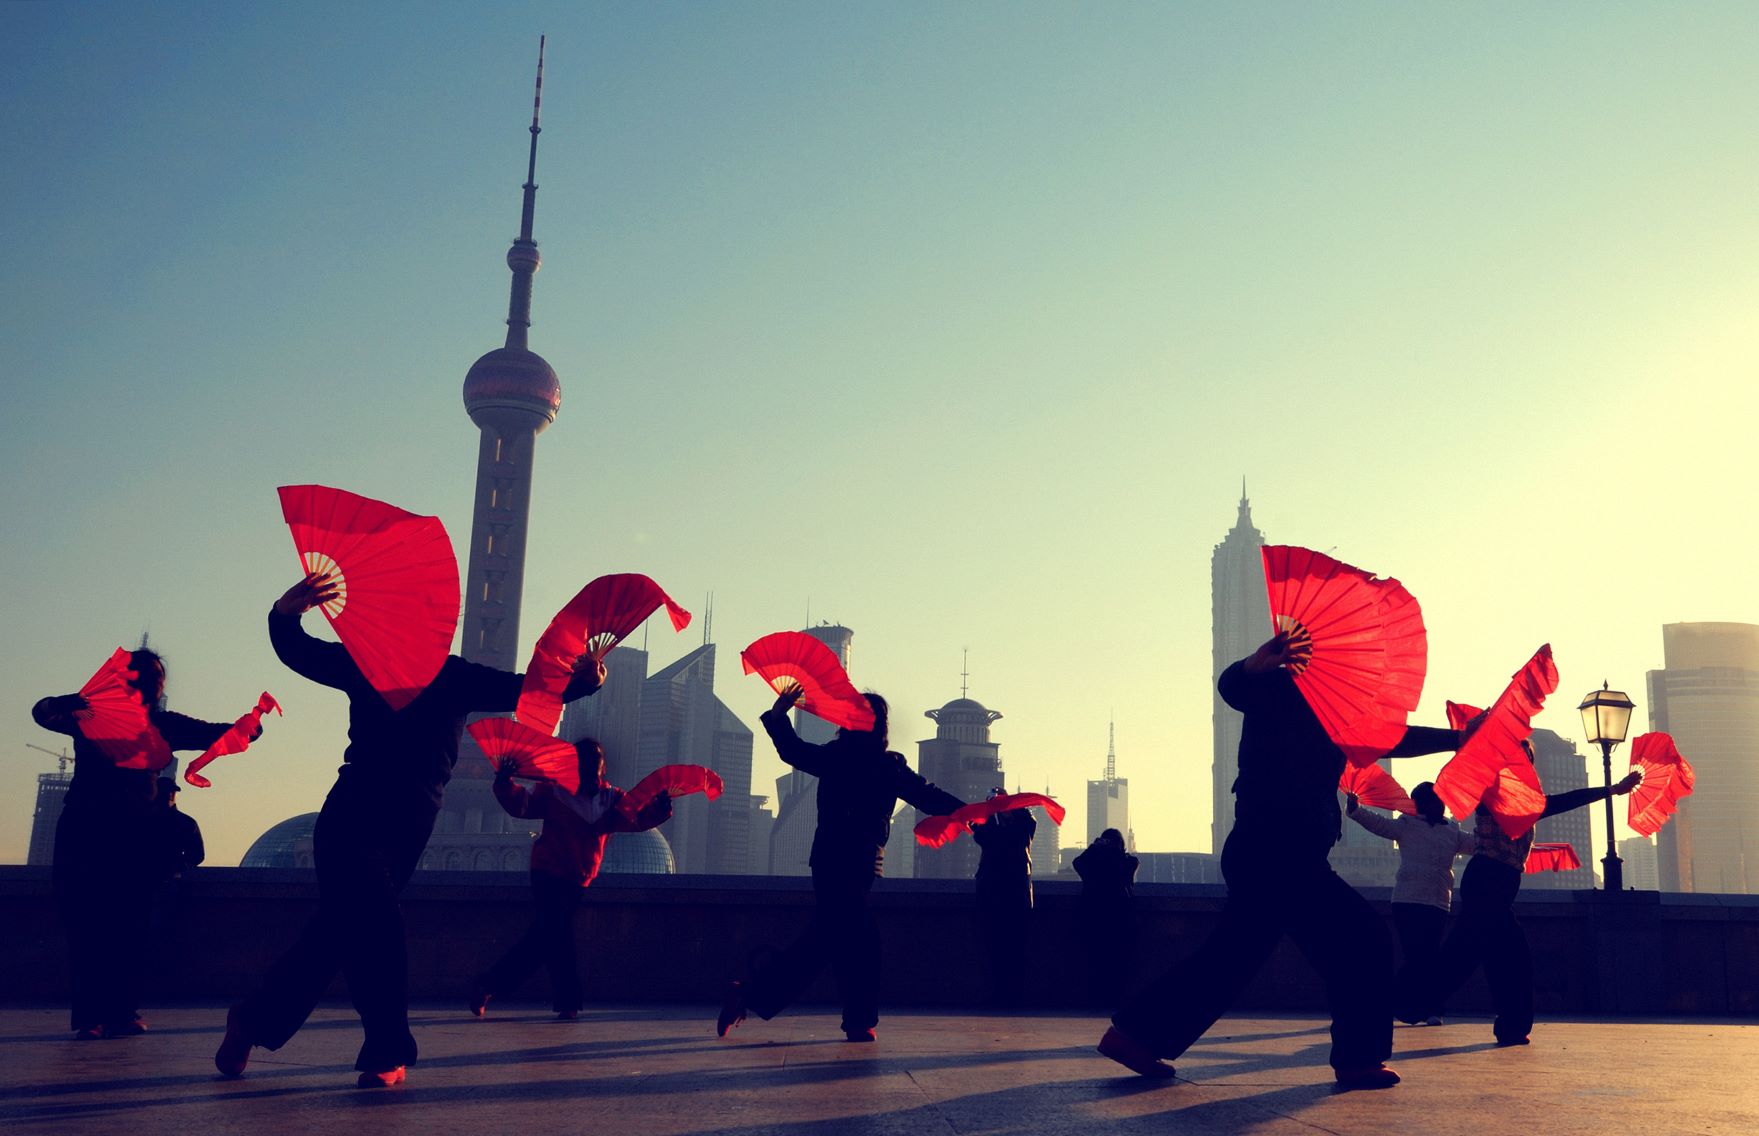 Traditional Chinese dance with red fans in the Bund Shanghai